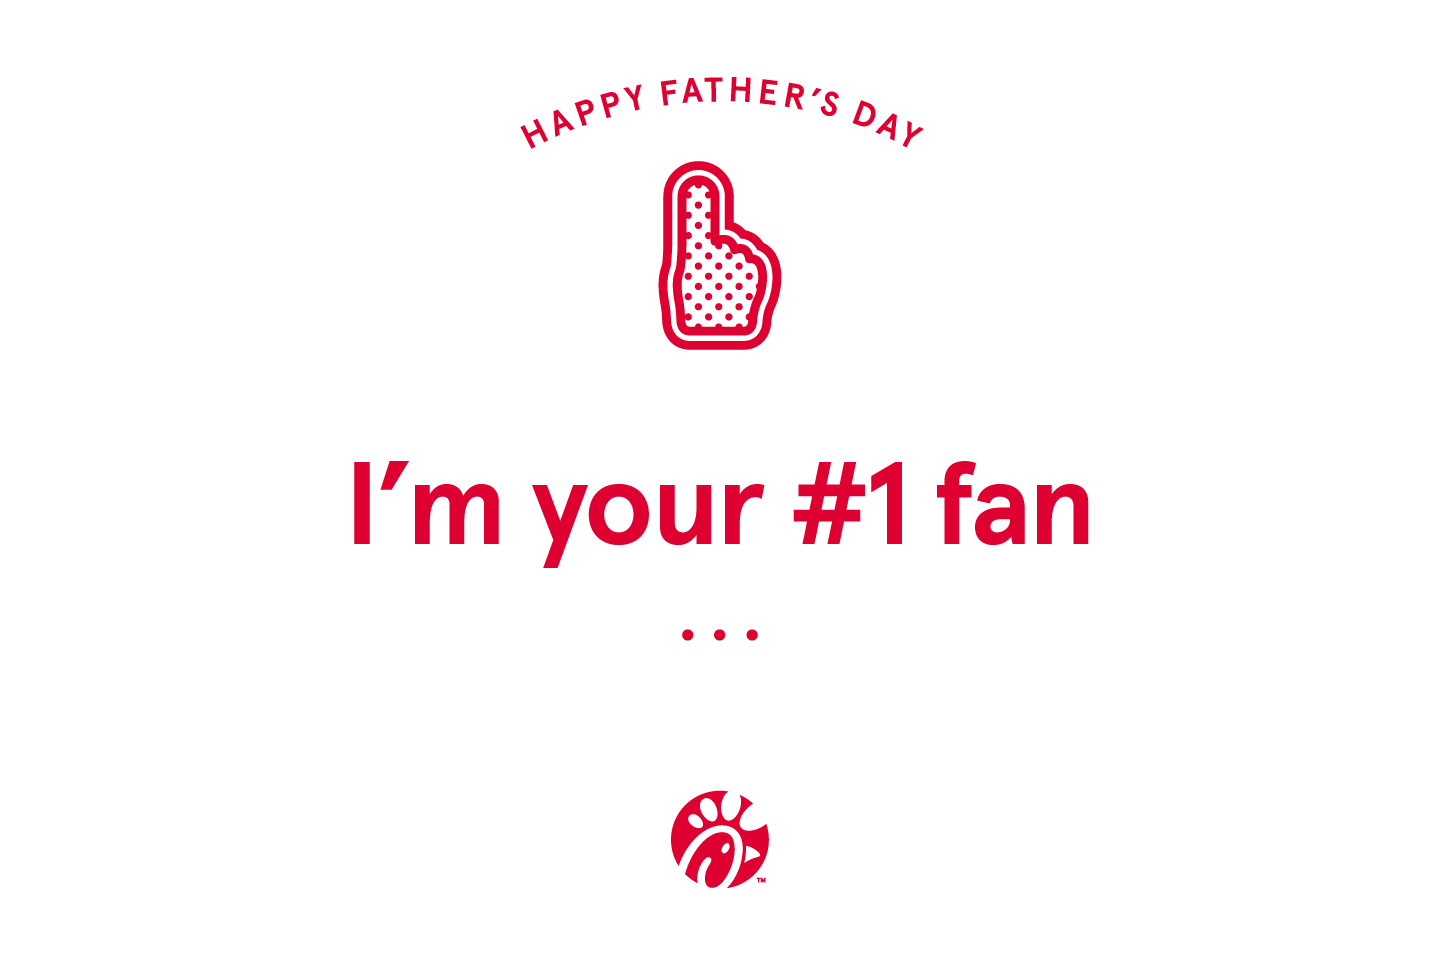 Share words of encouragement with Dad this Father’s Day ChickfilA